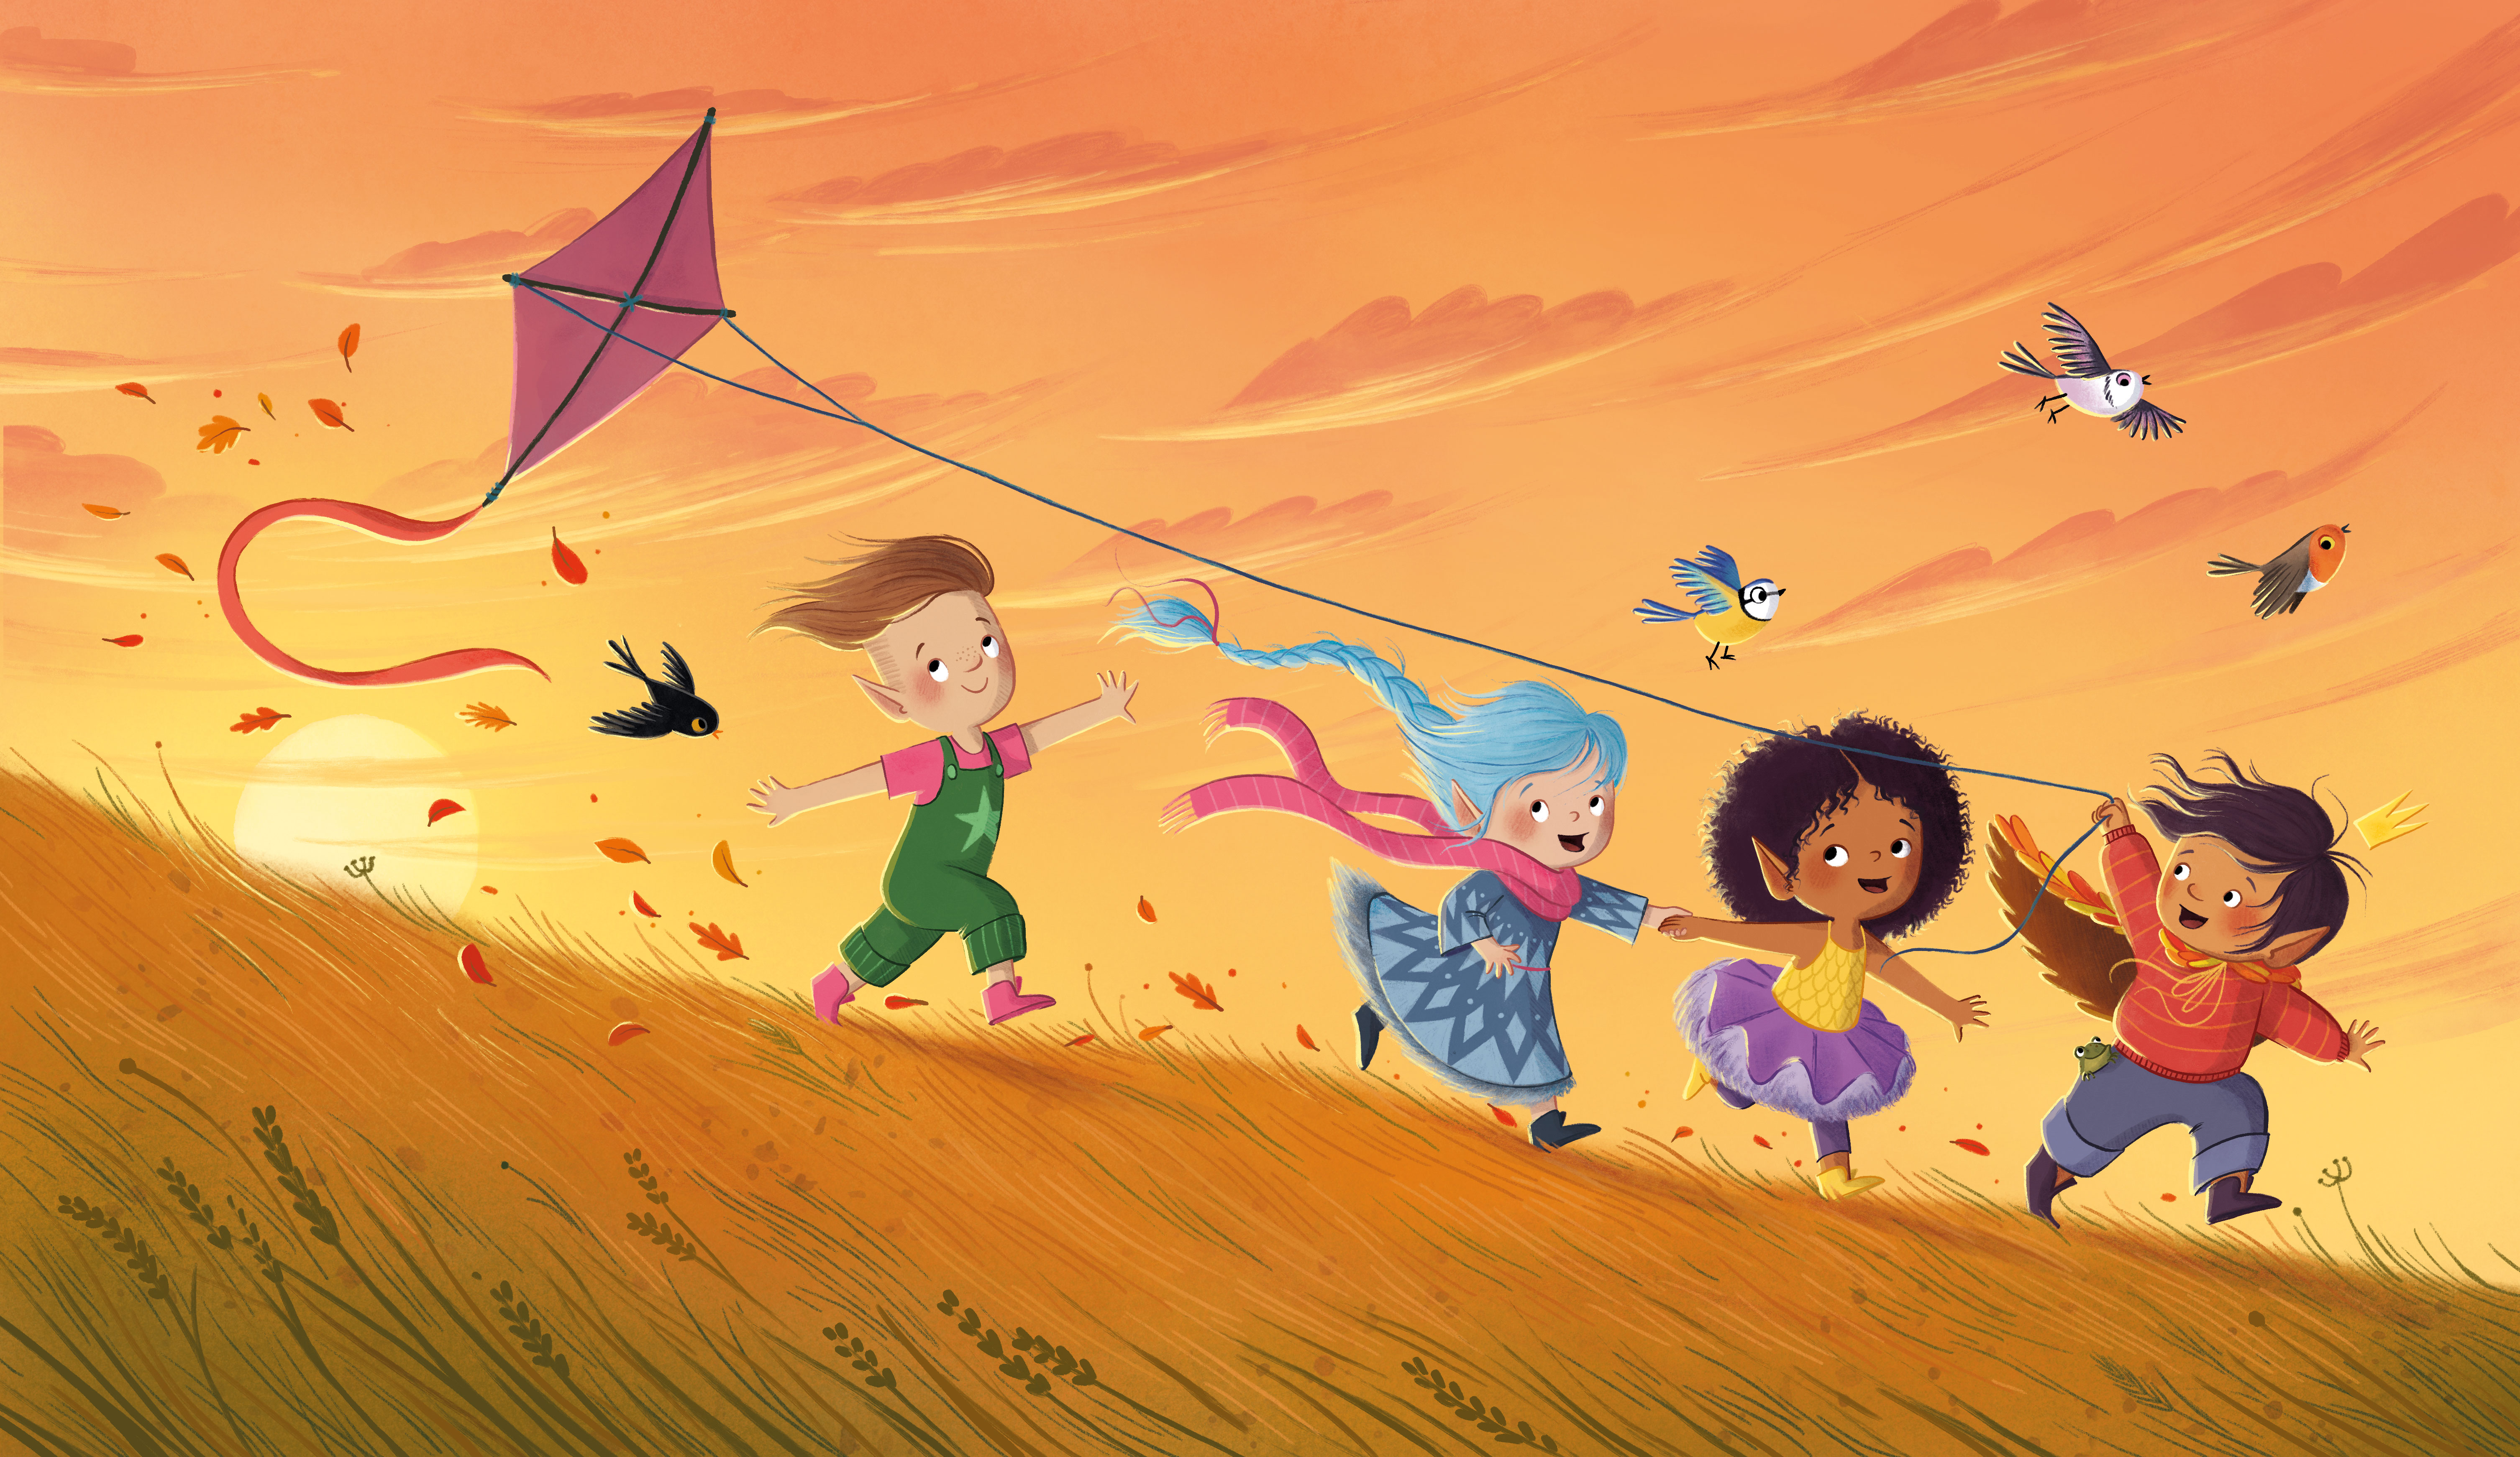 Illustration of four friends flying a kite at sunset